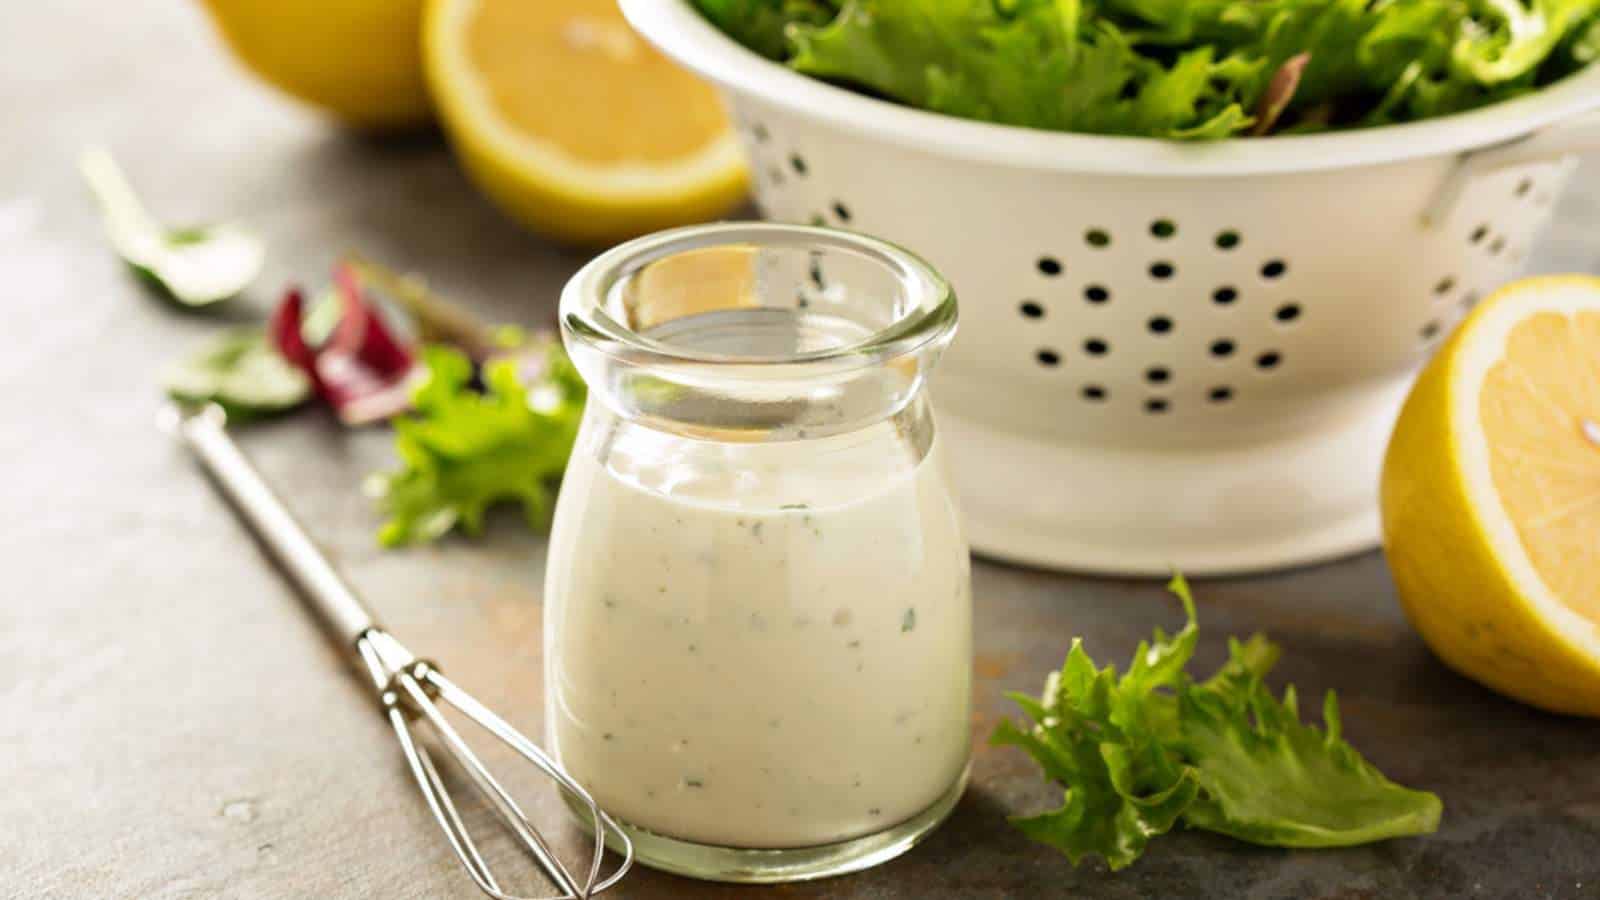 Ranch dressing in small jar beside salad bowl.
